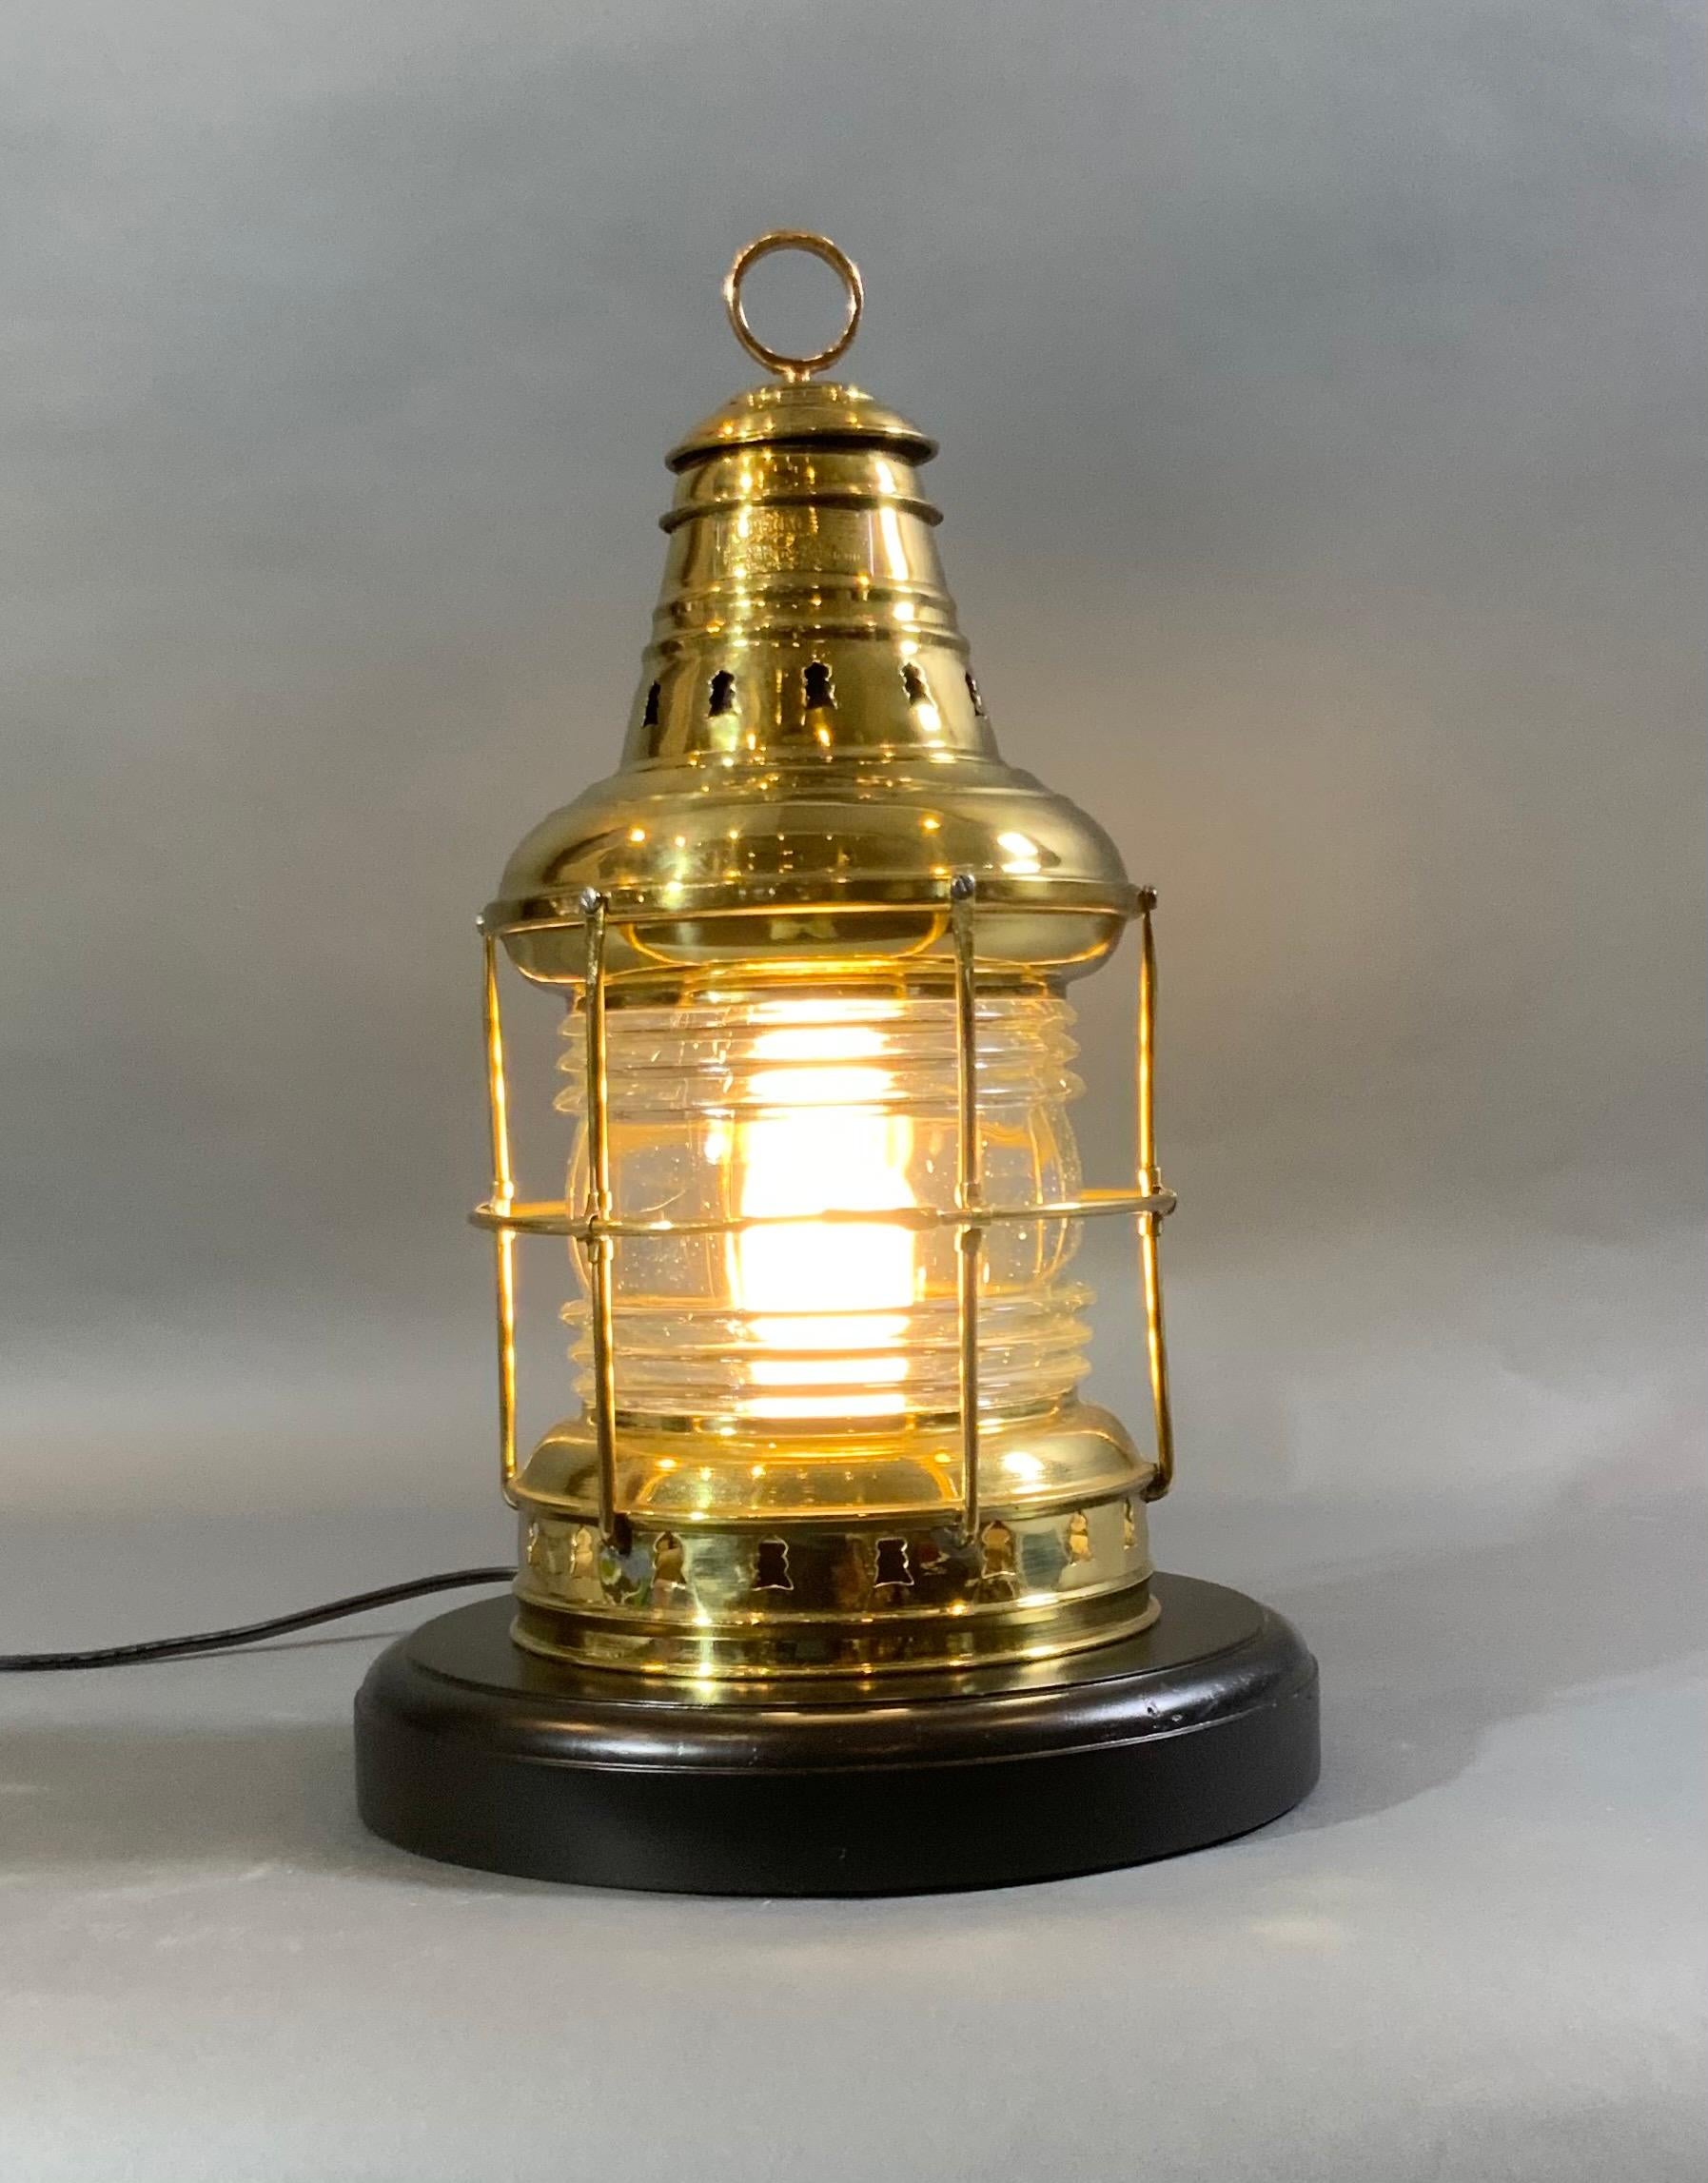 Ships anchor lantern by The Perkins Marine Lamp Company. With protective brass bars, vented top with hoisting ring. Lantern is mounted to a thick mahogany base. Lantern is wired with a new socket and cord for home use. Weight is 10 pounds.